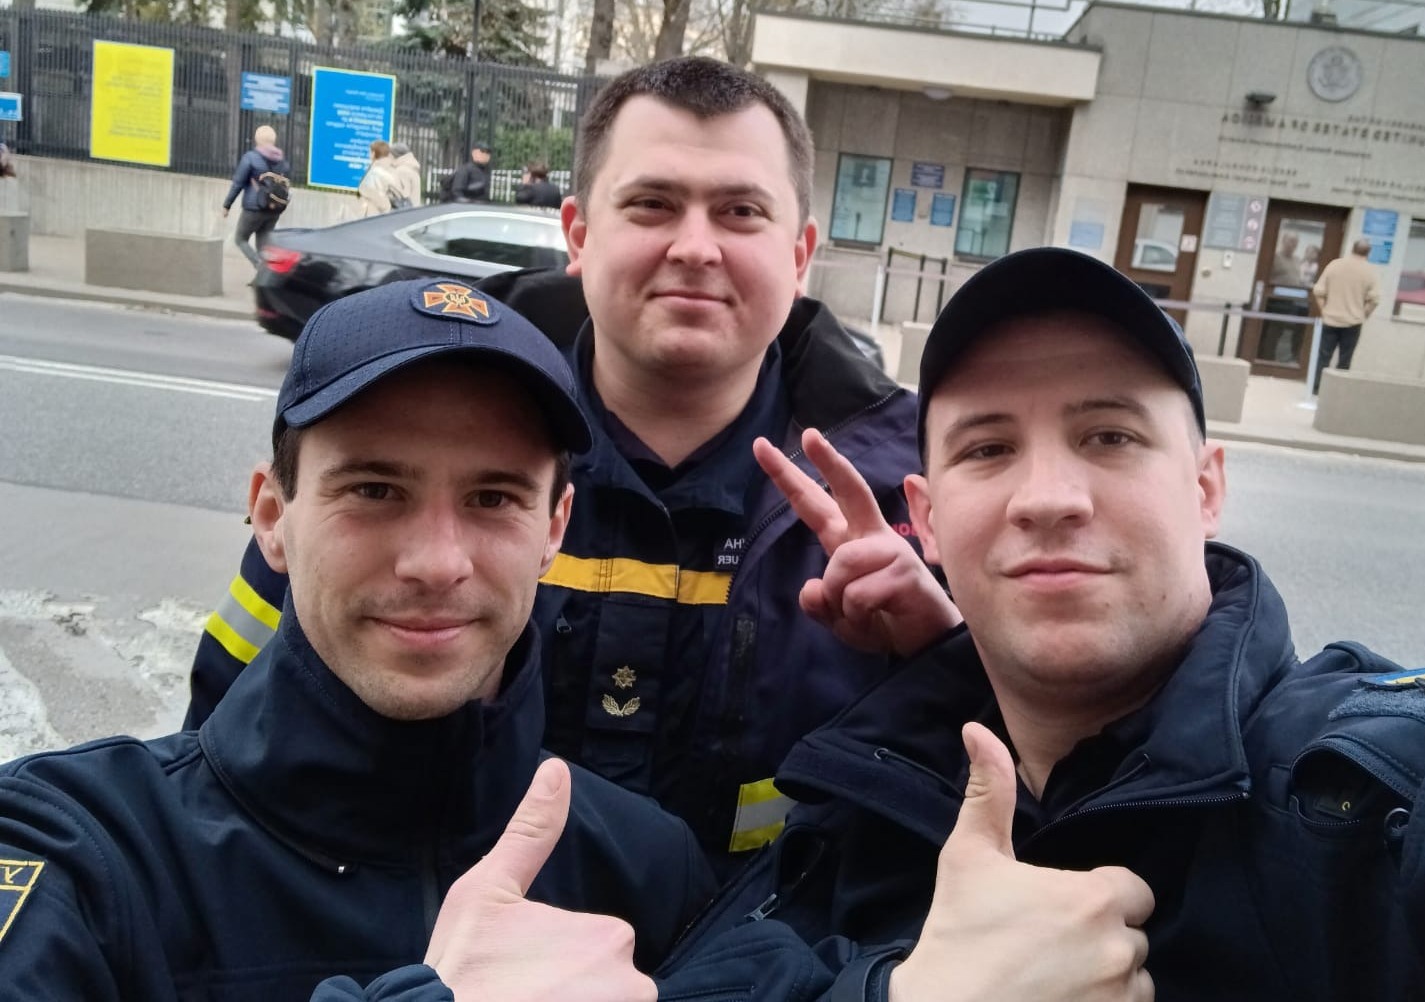 Ukrainian firefighters are coming to the USA: who are they